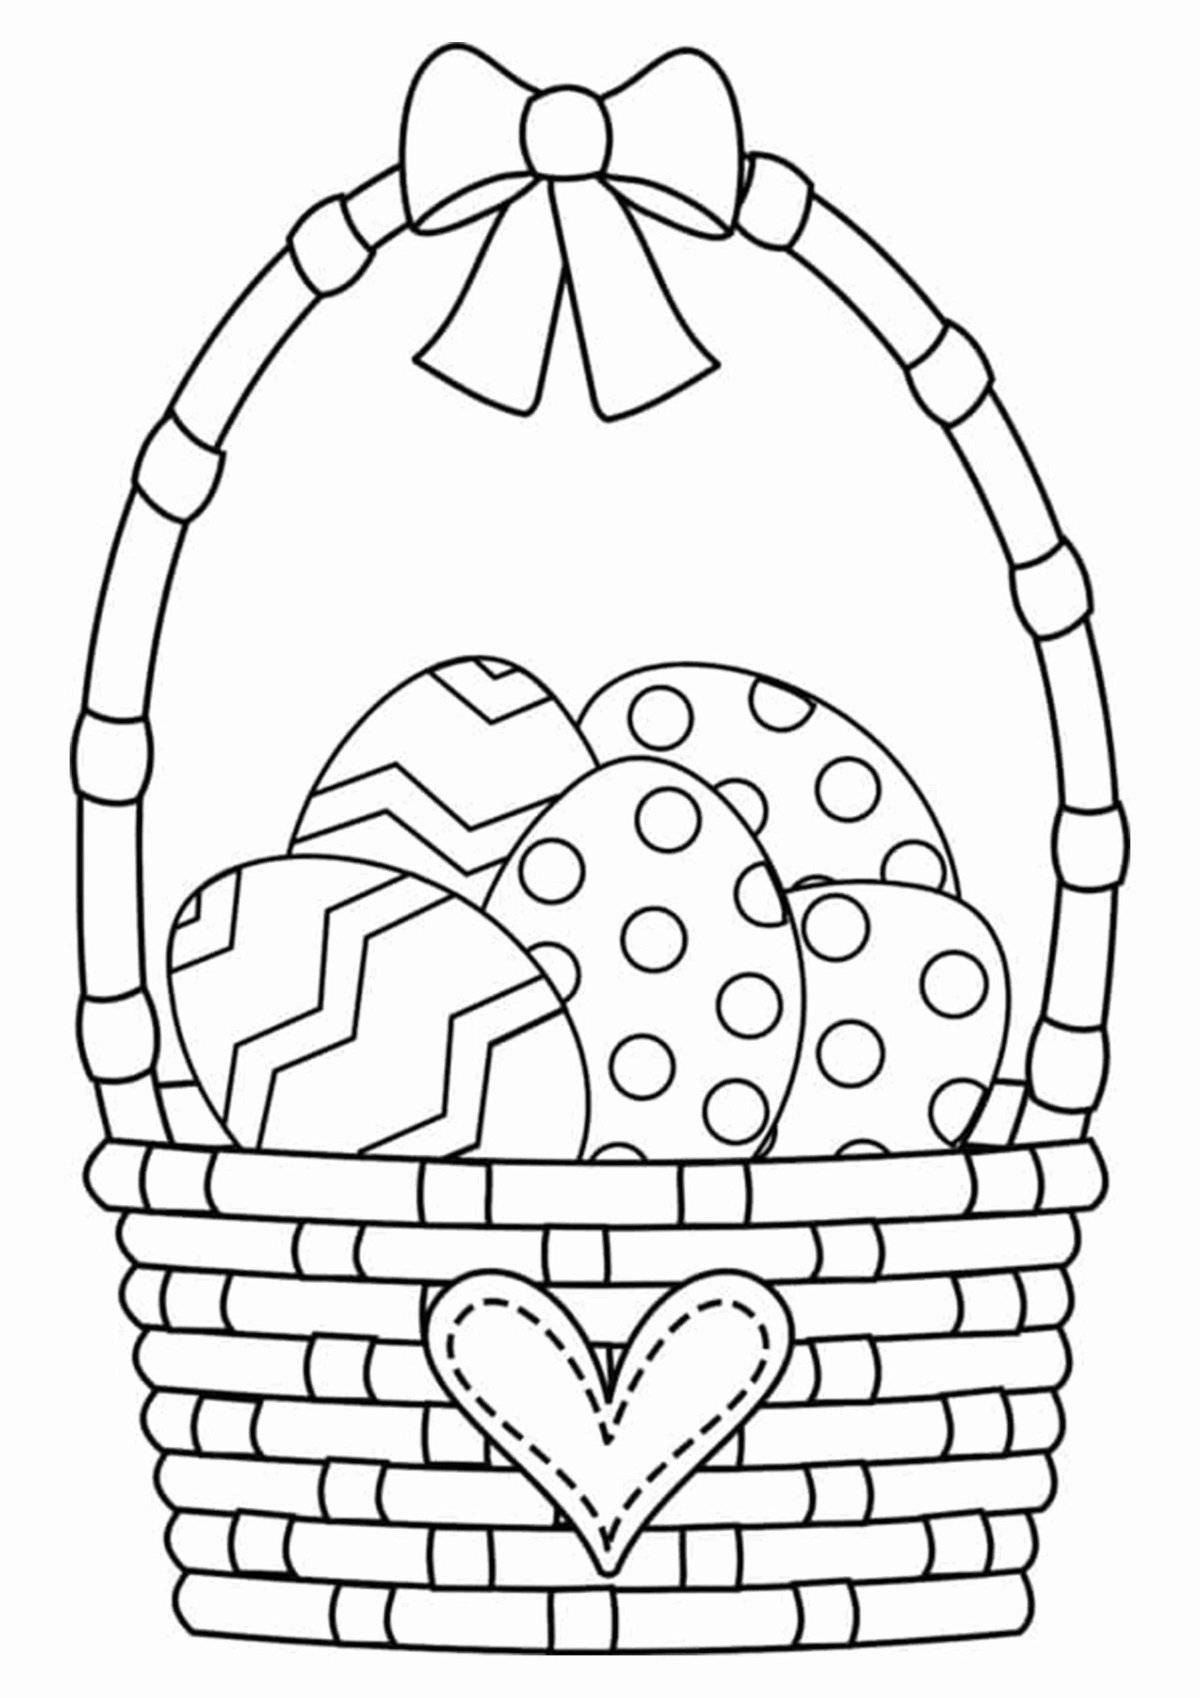 Bright Easter coloring book